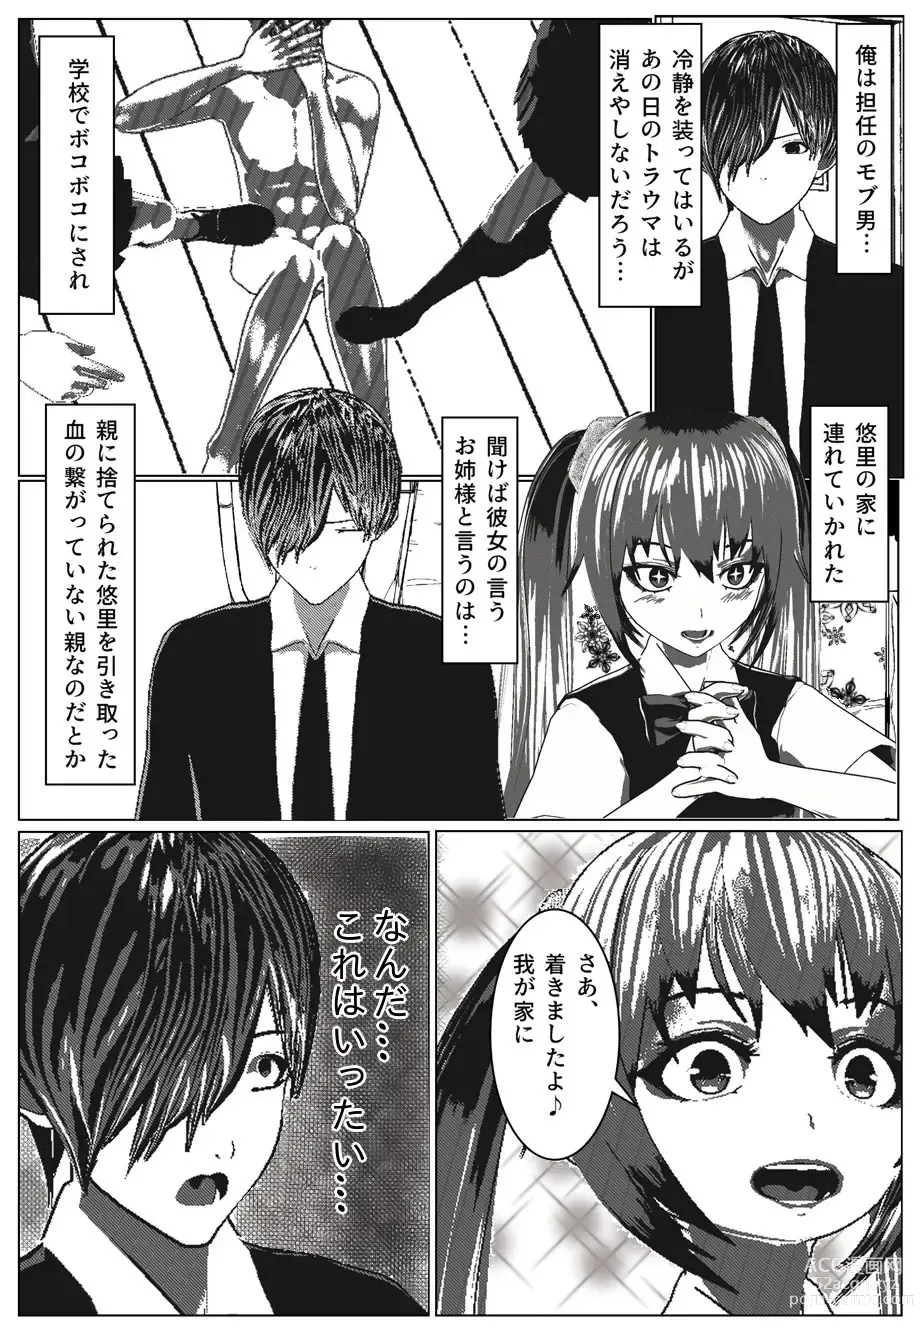 Page 3 of doujinshi Daily life of Mob man teacher 2